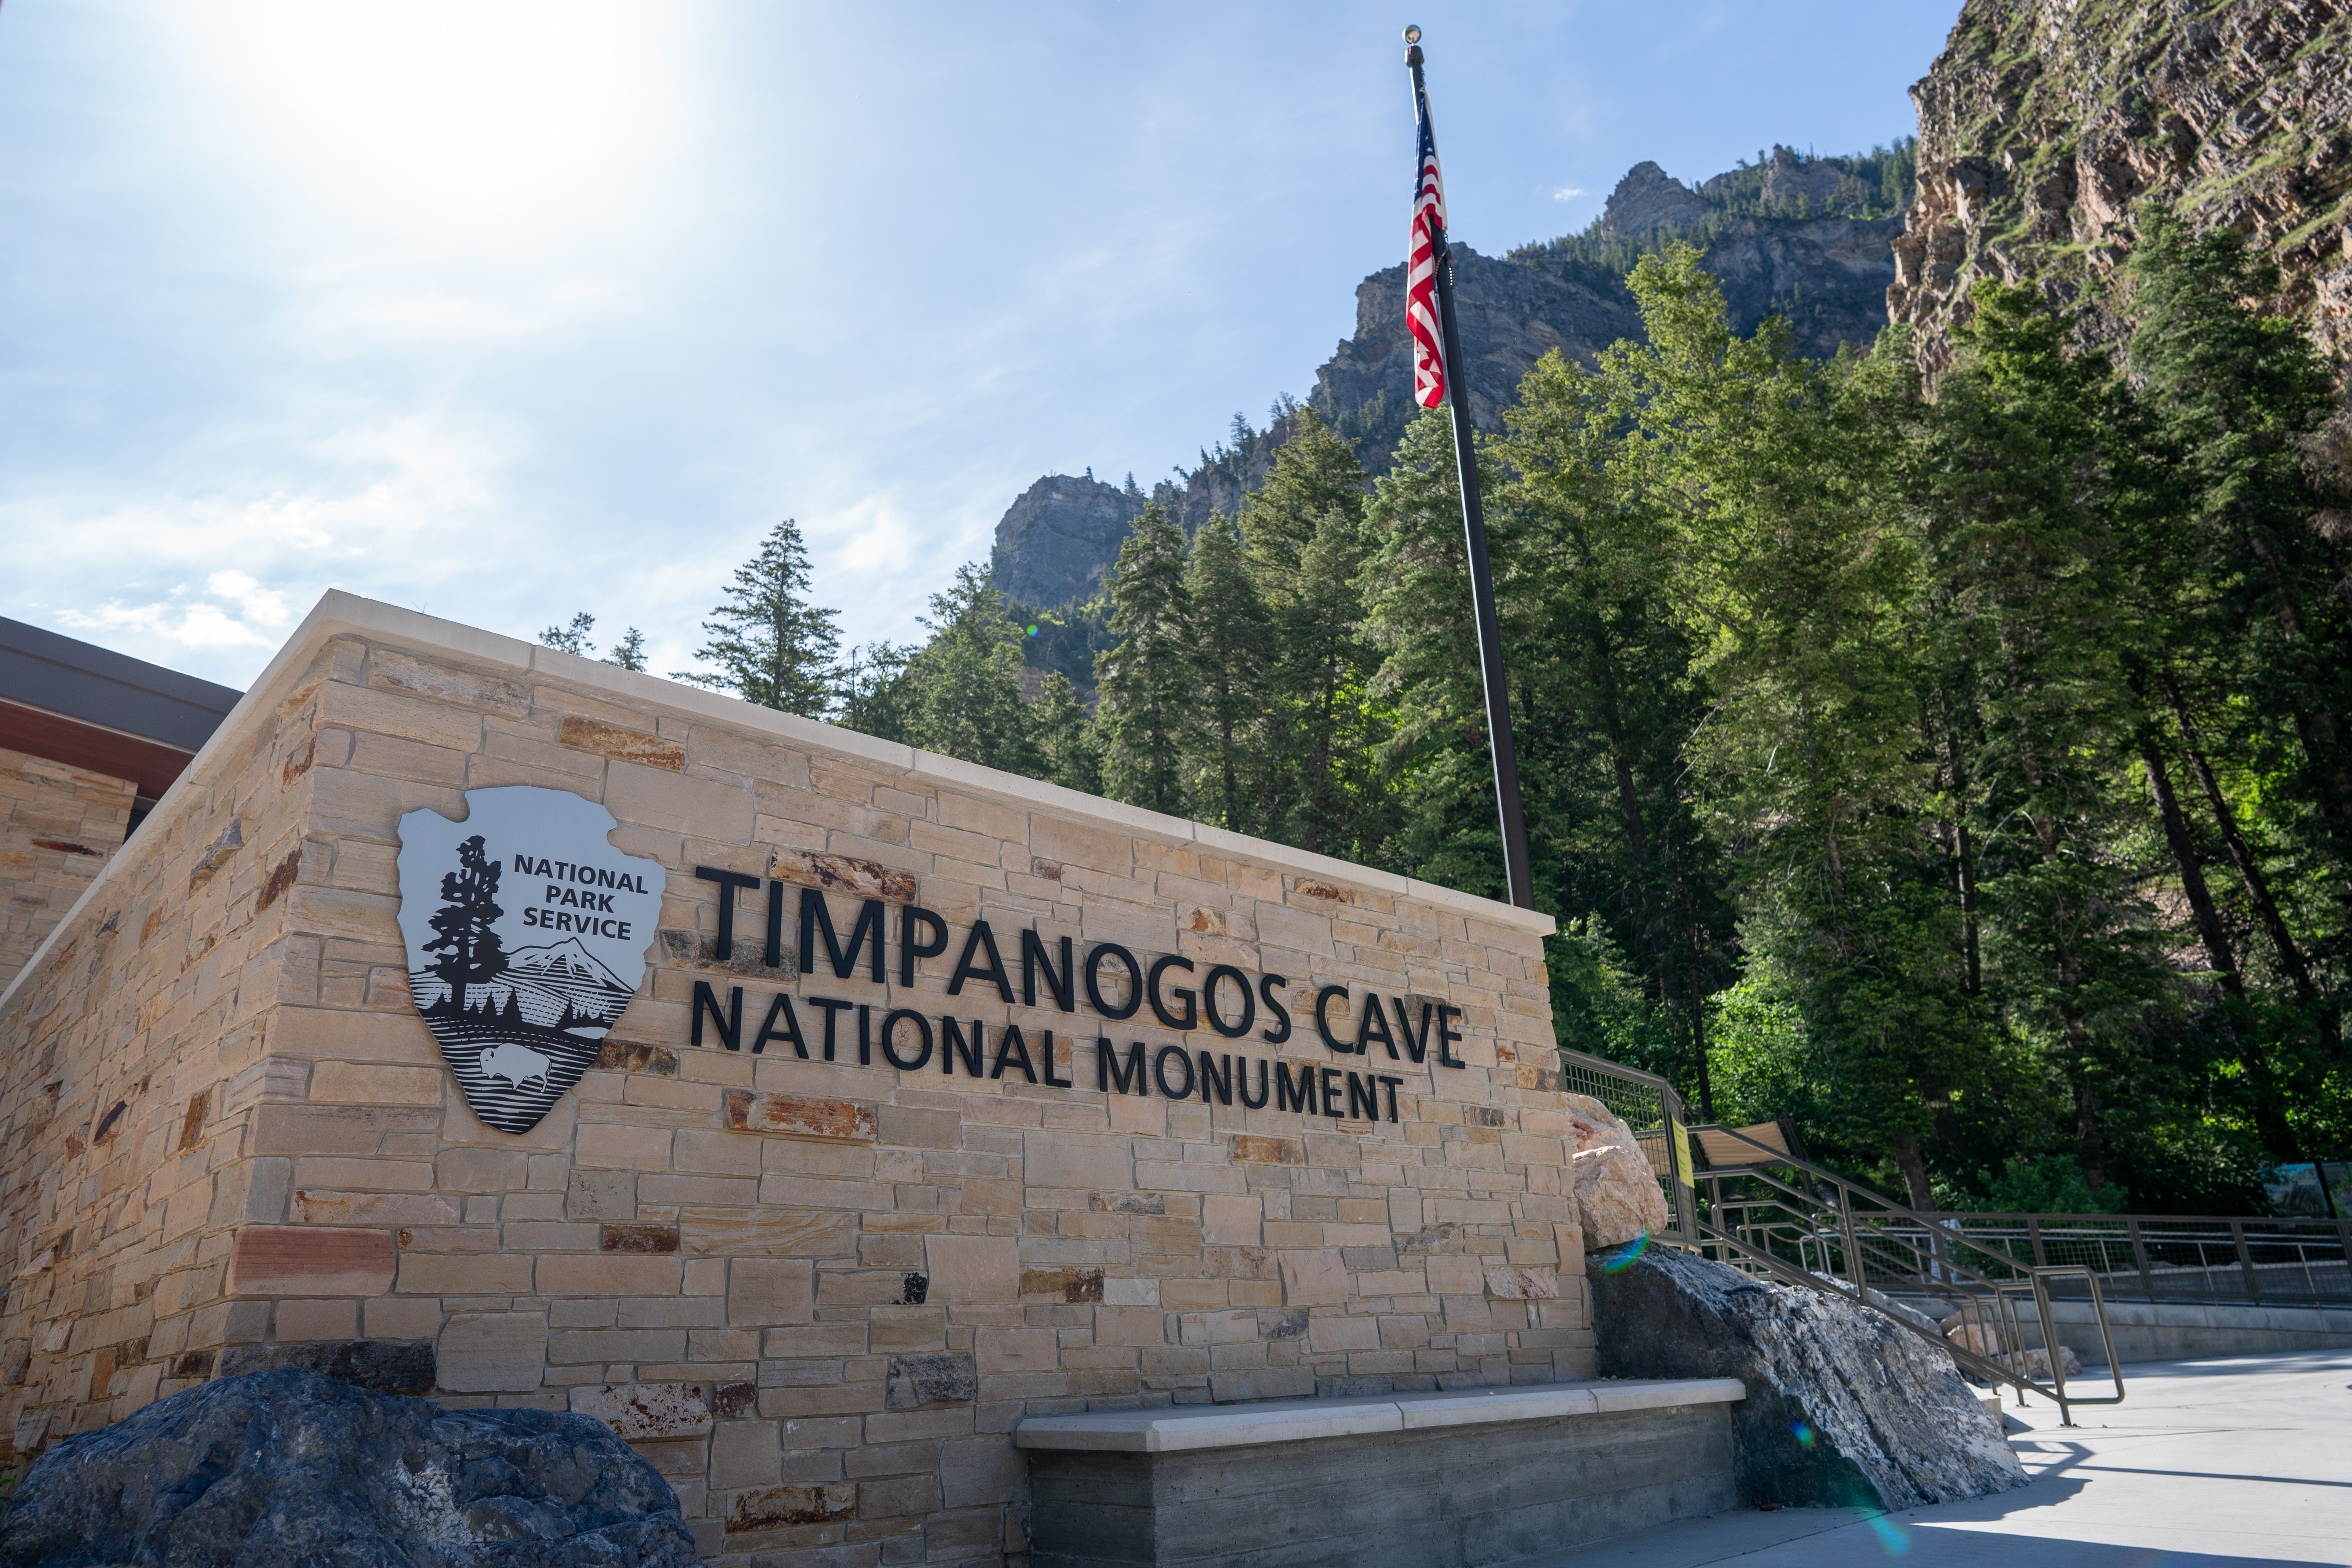 A silver National Park Service arrowhead by the sign reading "Timpanogos Cave National Monument"